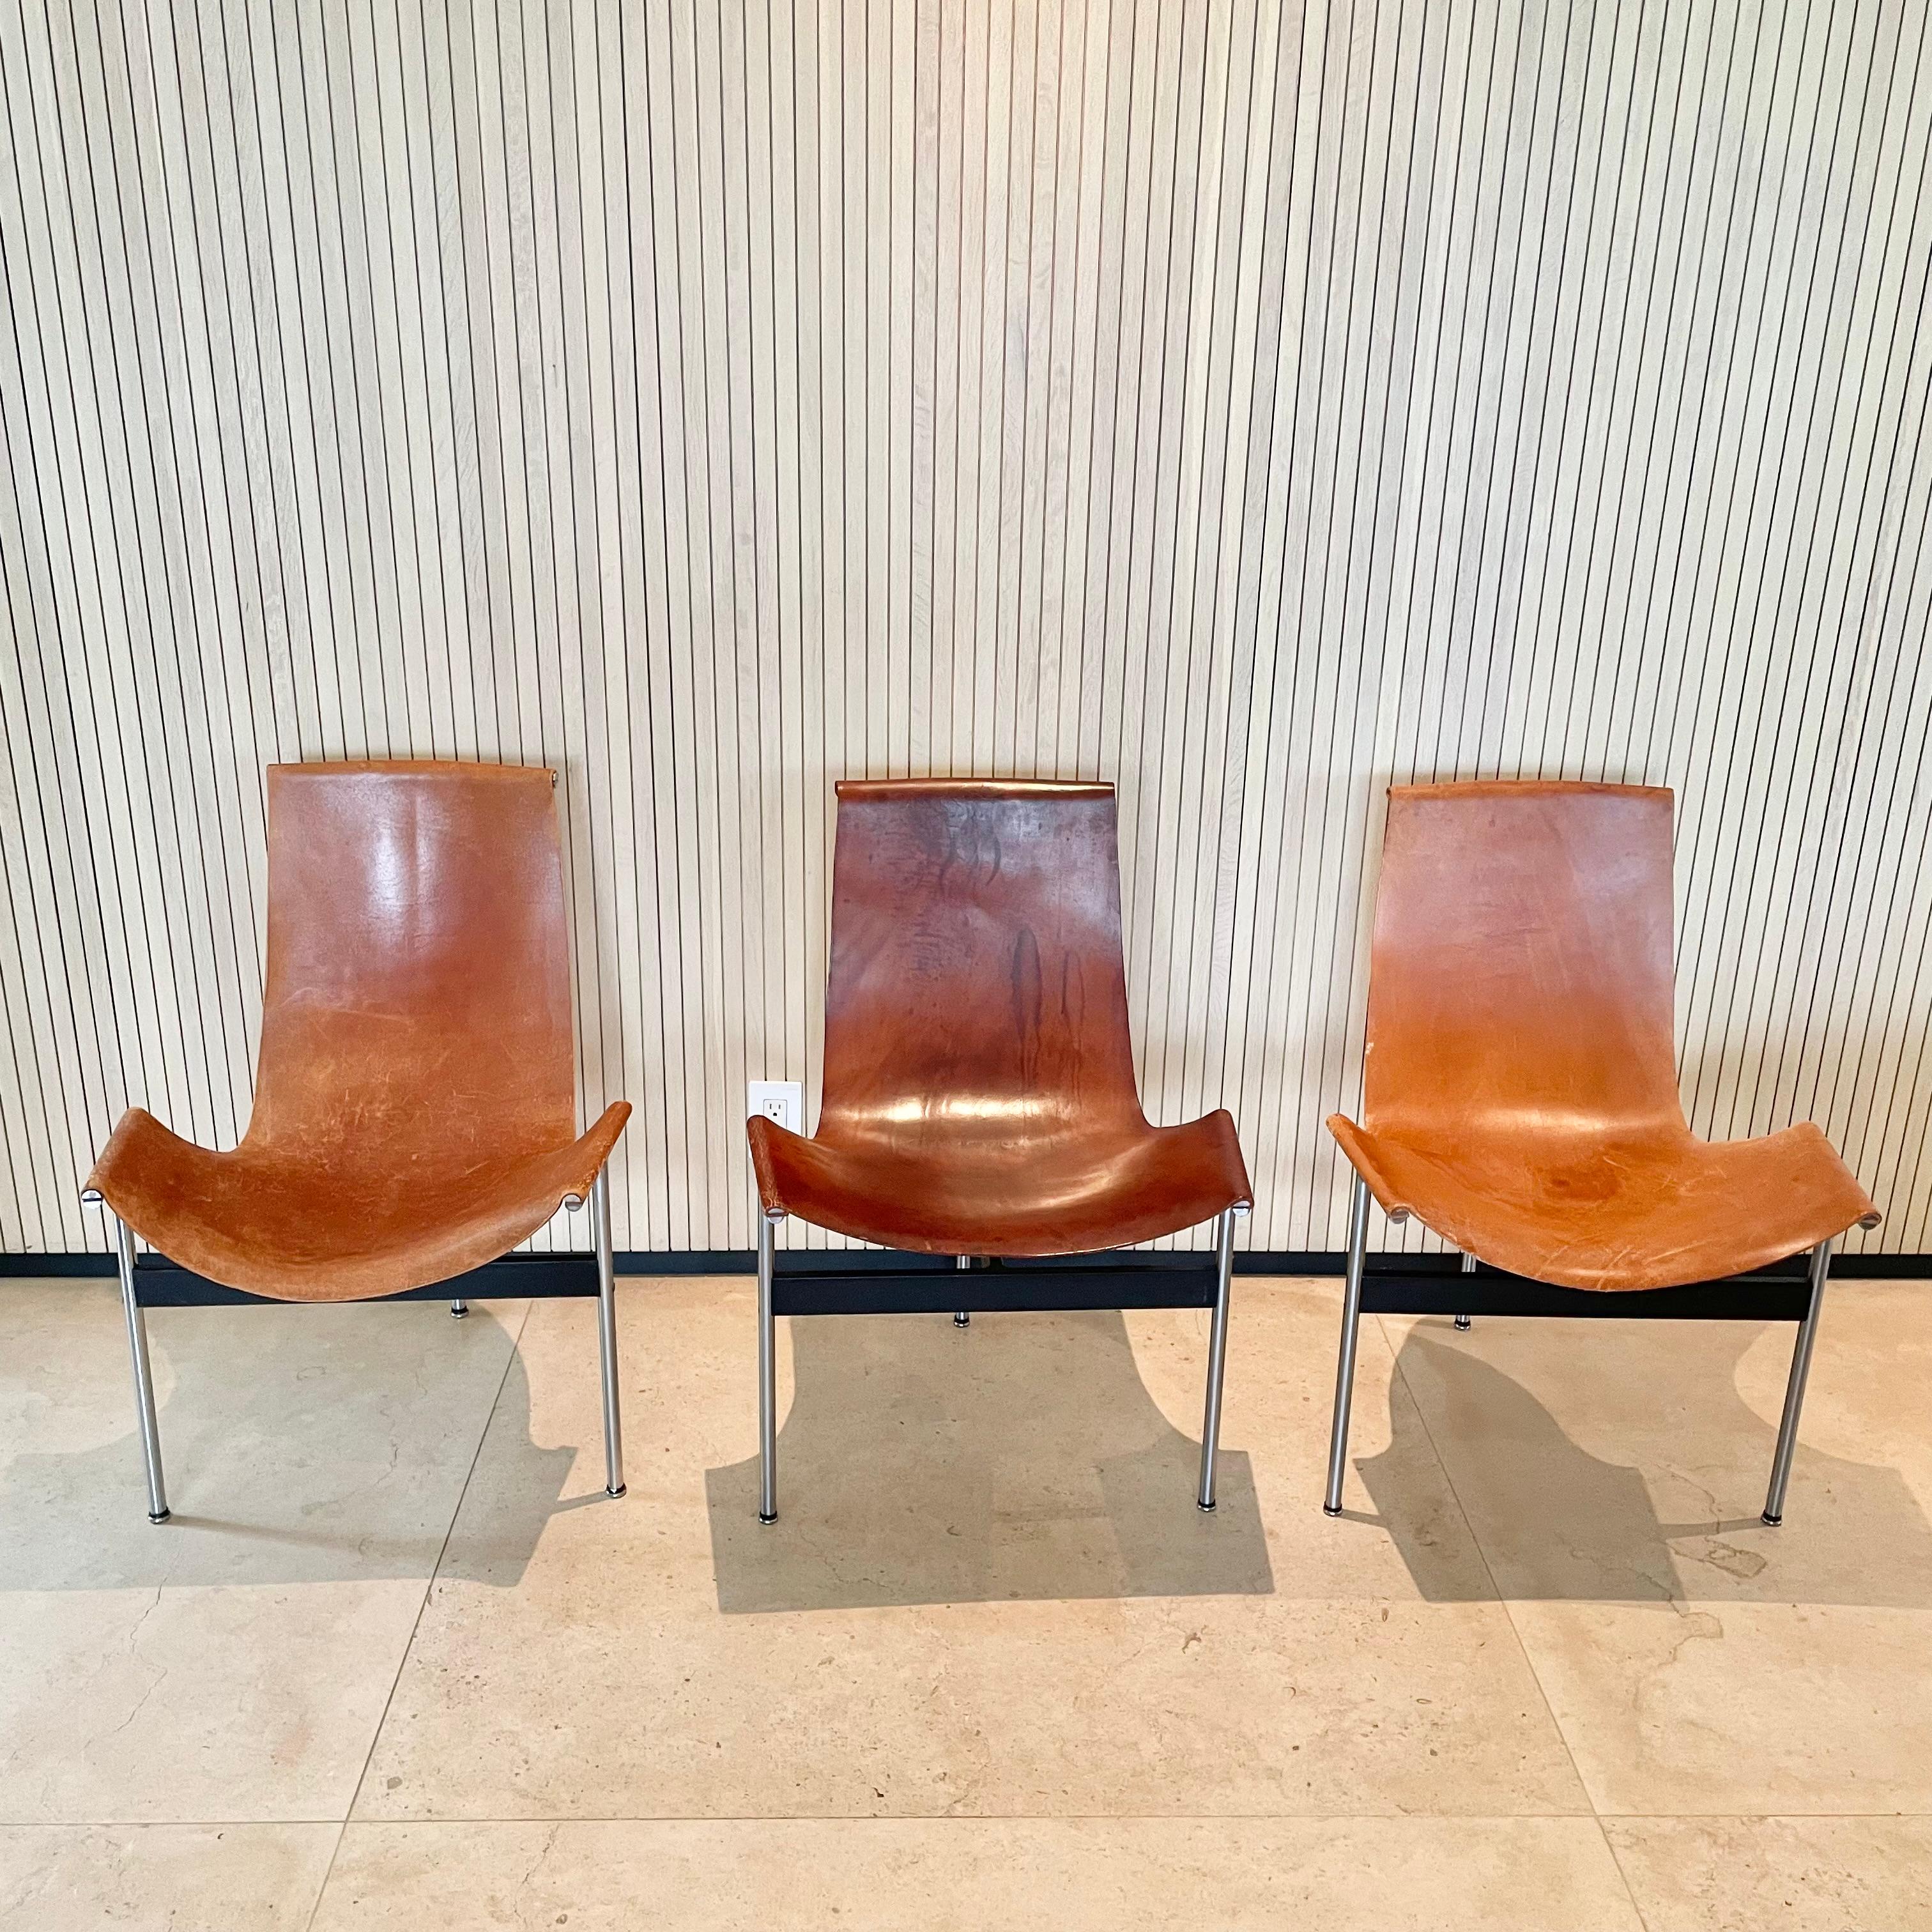 Mid-Century Modern T Chairs by Katavolos, Littell and Kelley for Laverne, 1950s USA